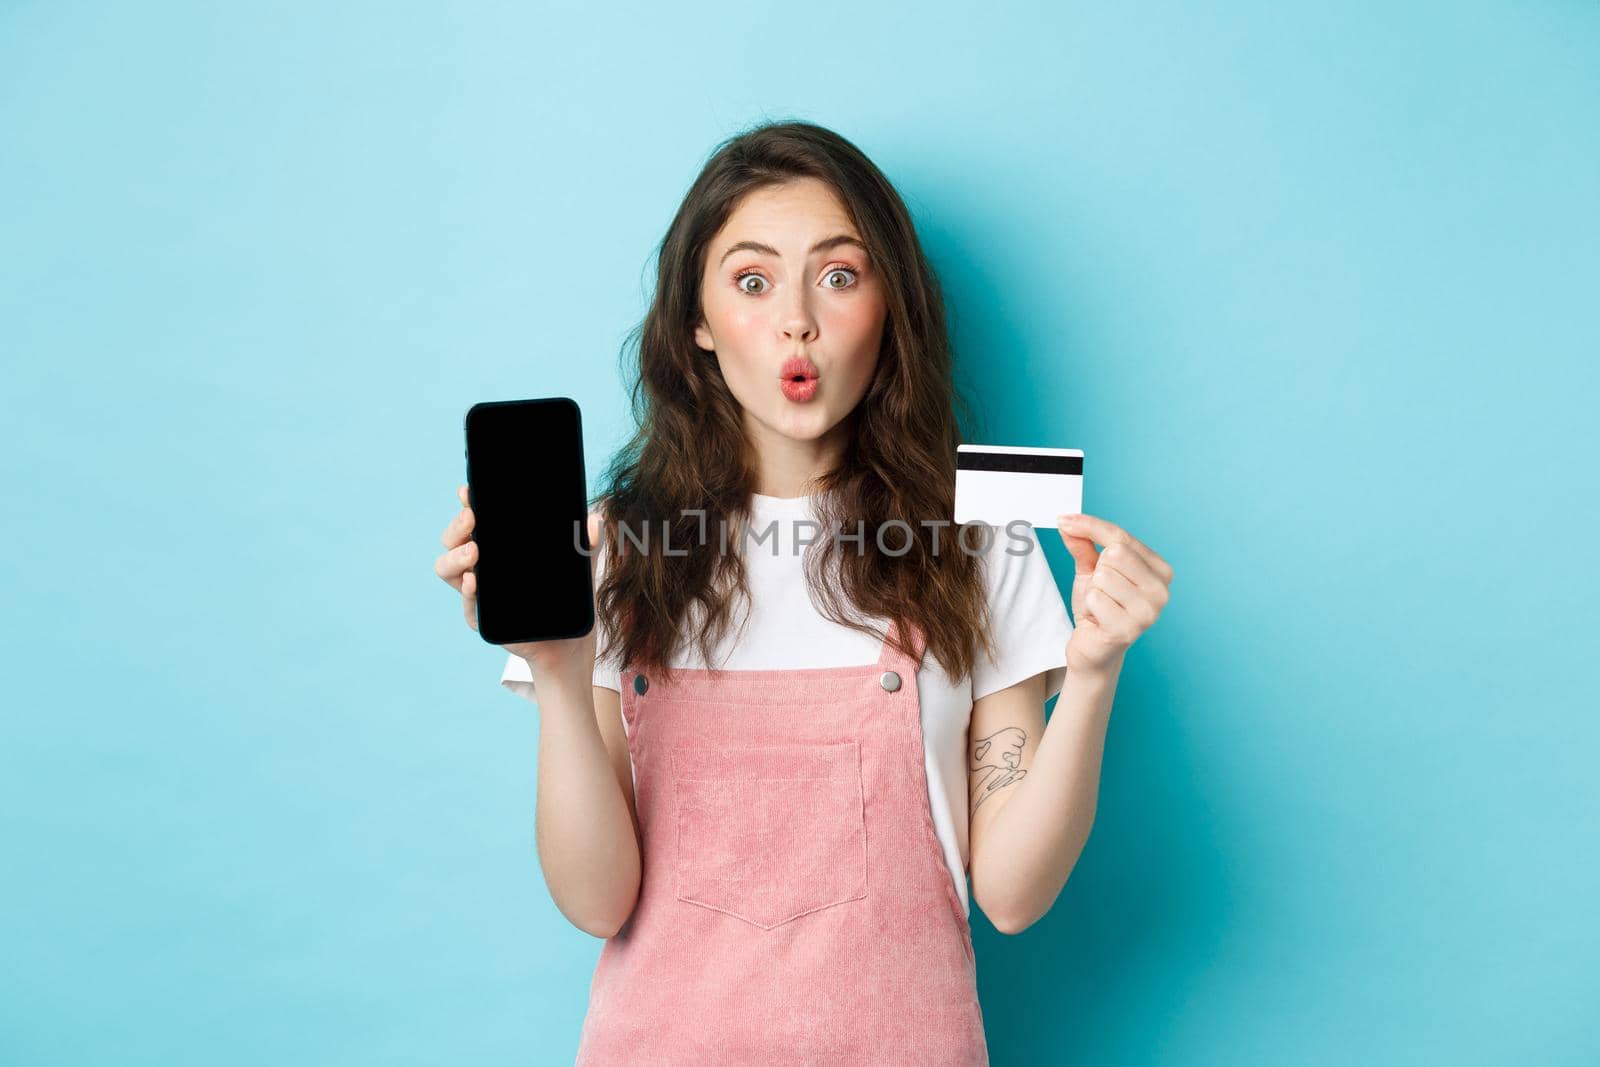 Portrait of young beautiful woman showing plastic credit card and empty smartphone screen, look amused and interested, showing interesting app, standing over blue background.